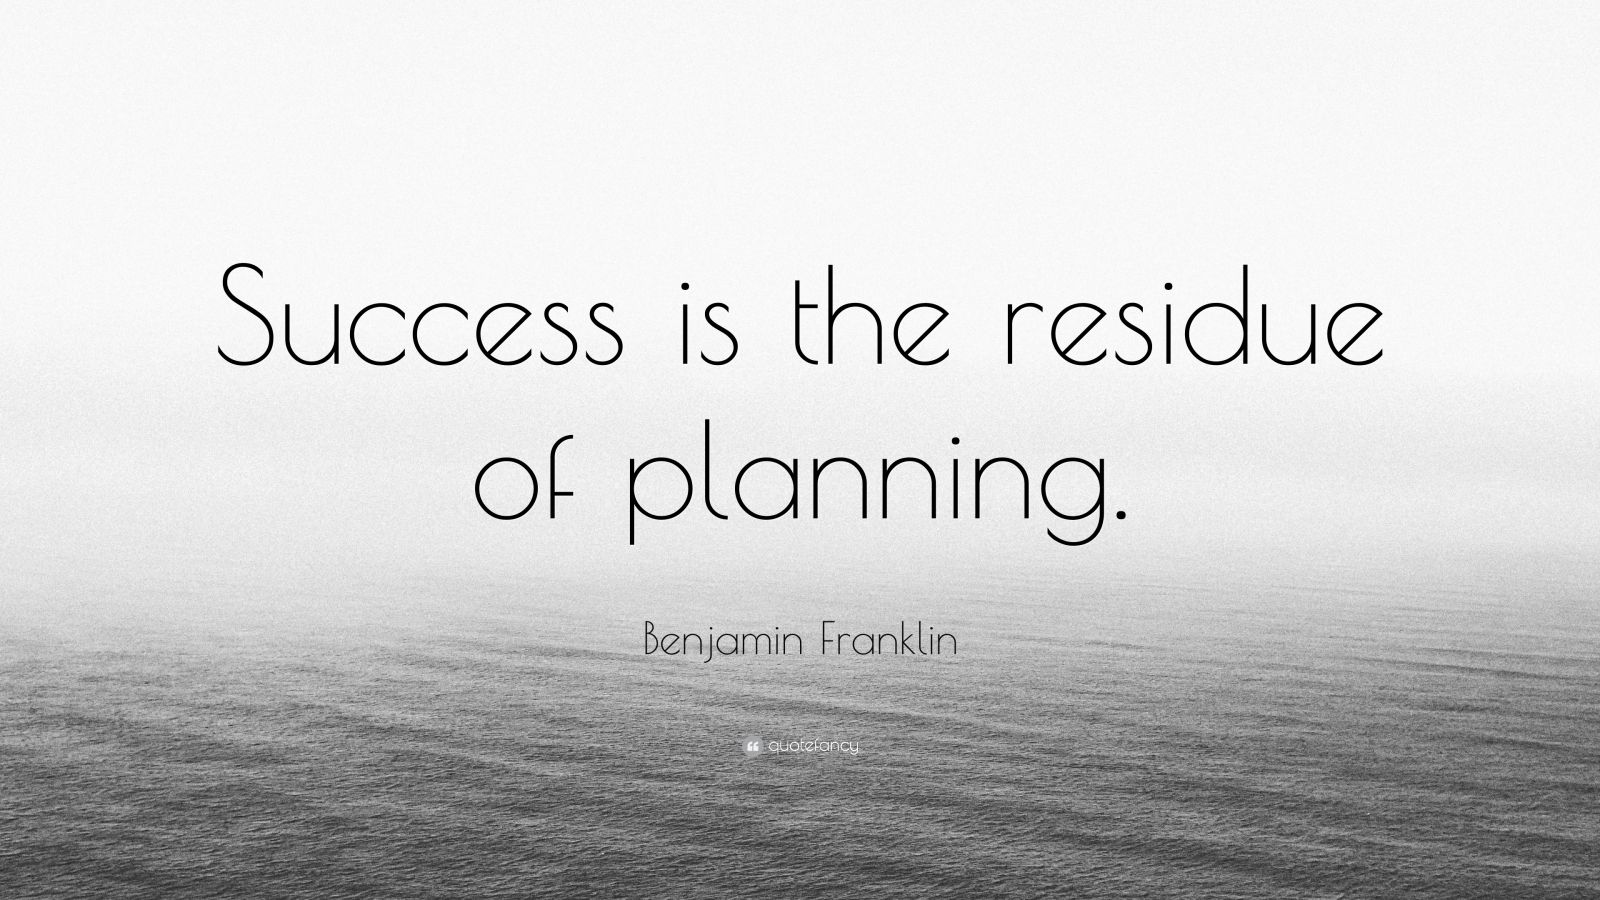 Benjamin Franklin Quote “Success is the residue of planning.”